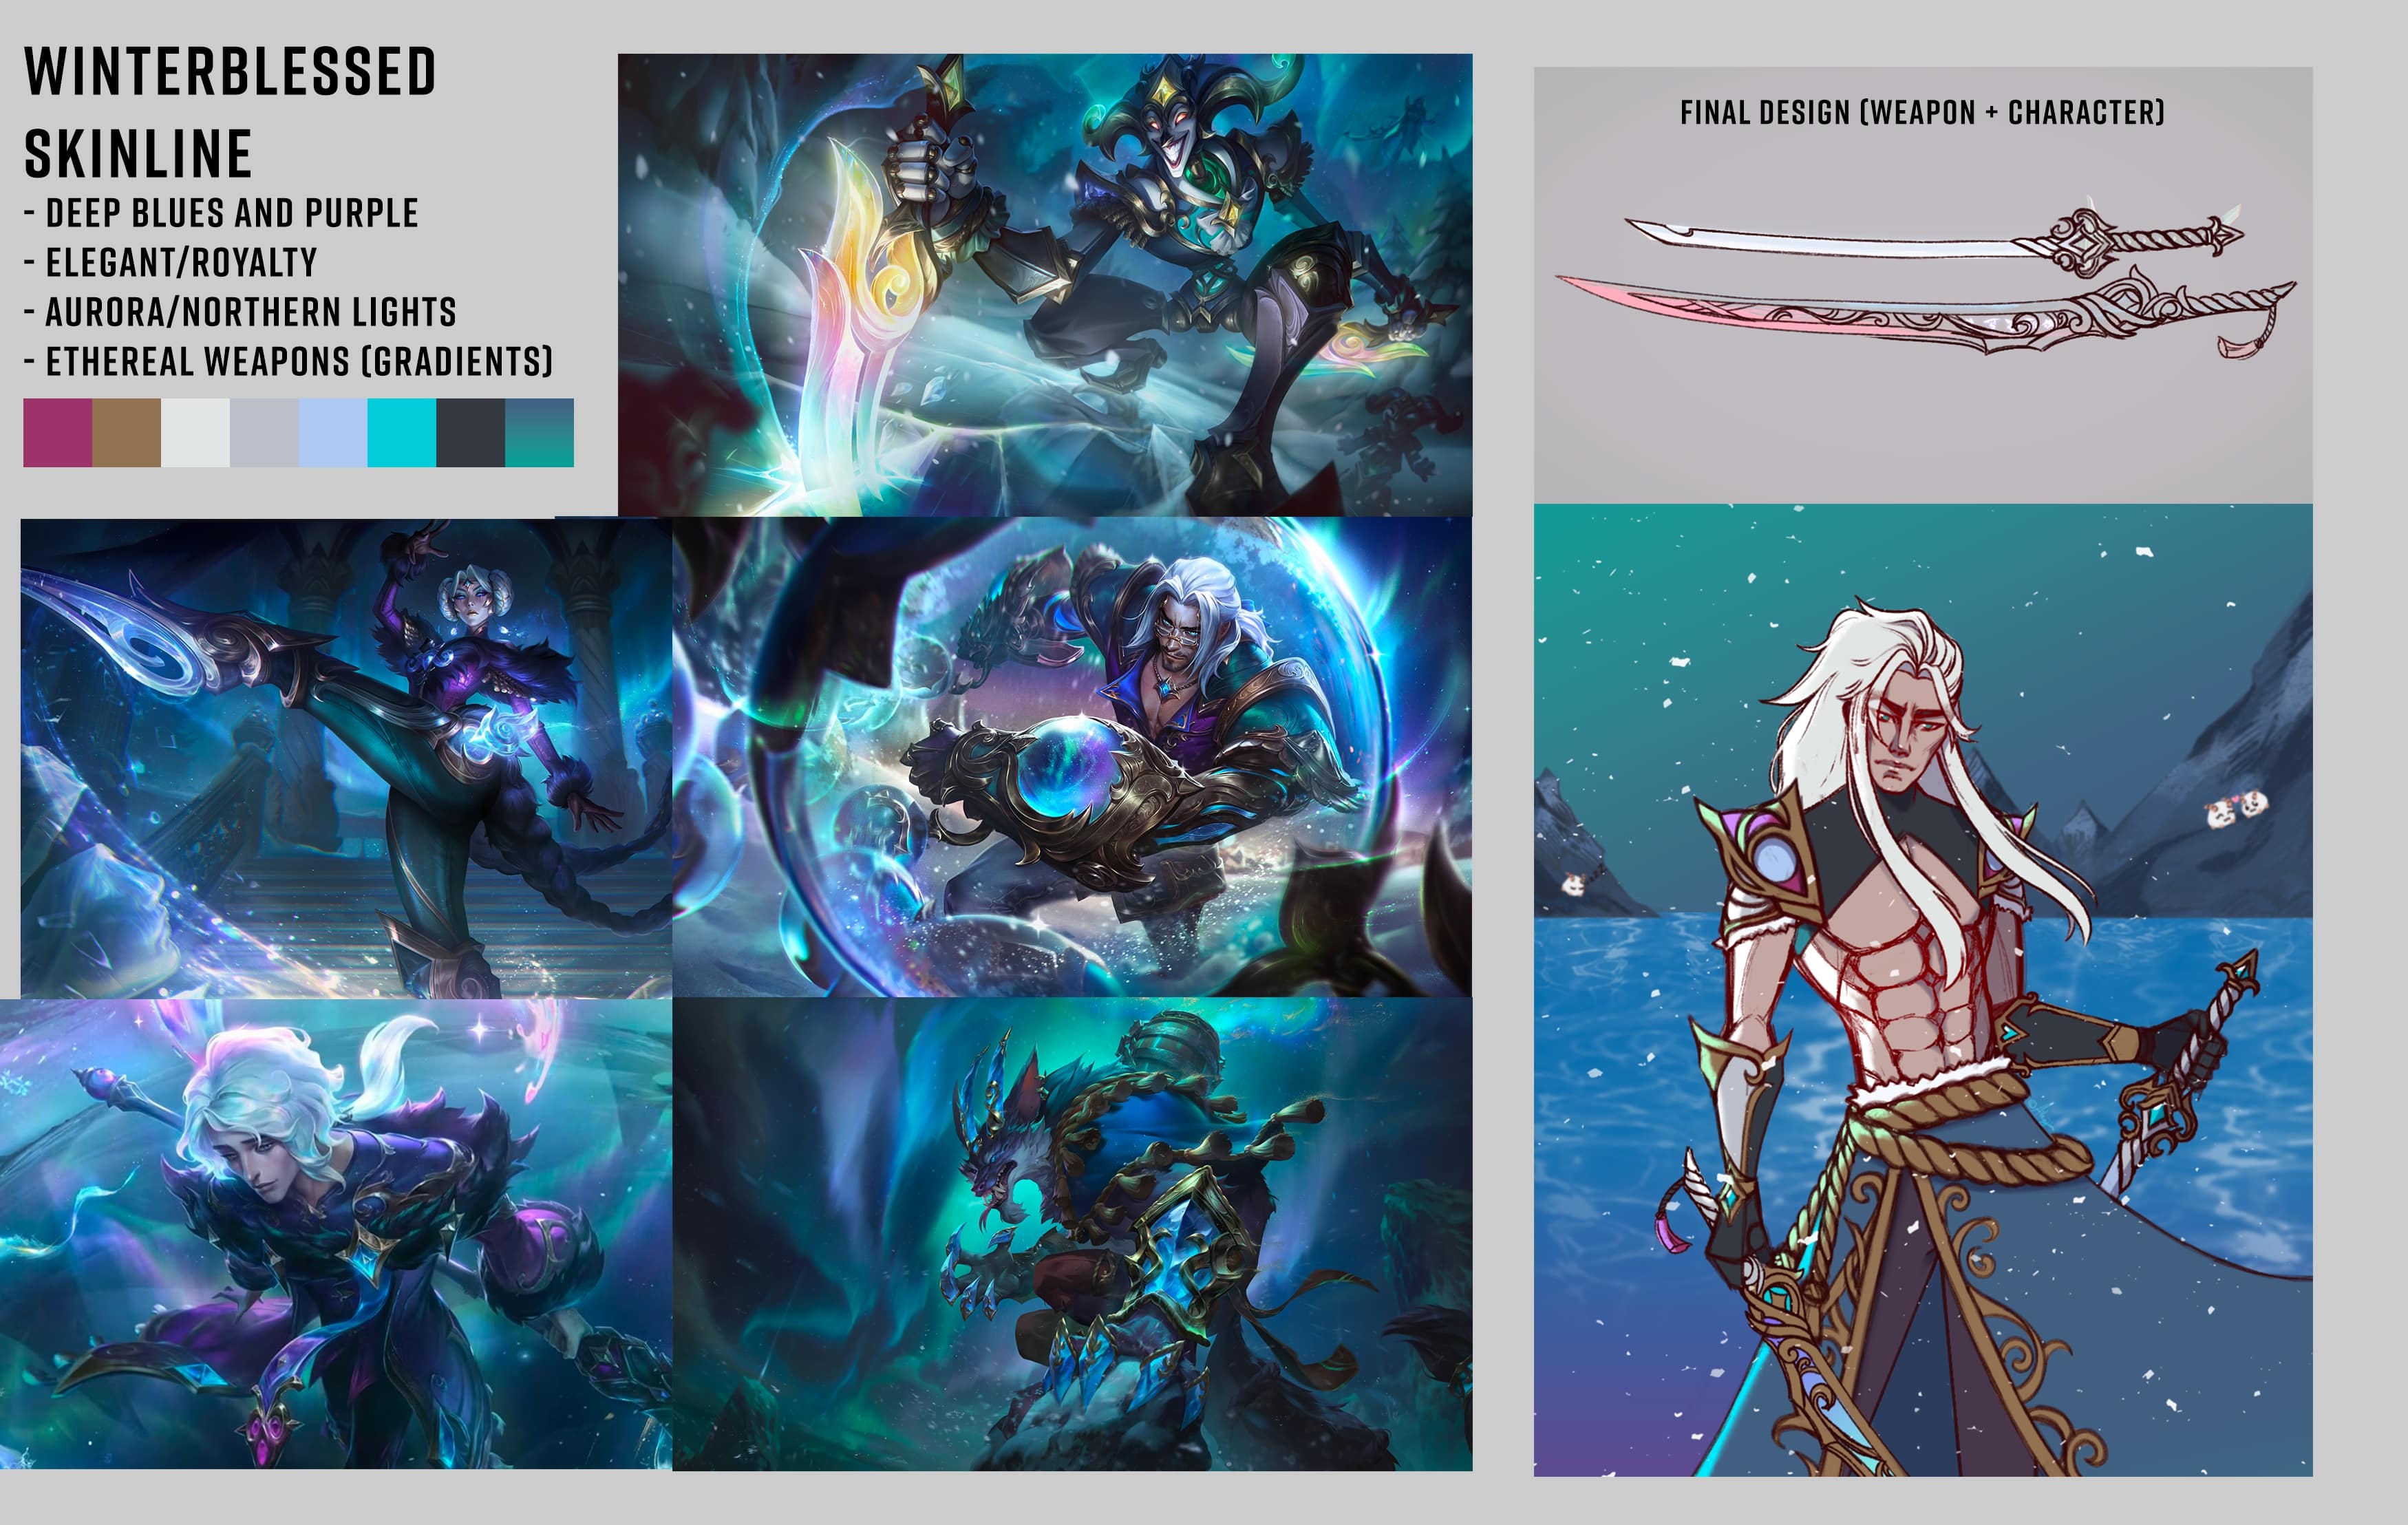 I wanted to explore the Winterblessed skinline that focused on deep blues and purple symbolic of the Northern Lights and decided to keep the color palette limited to cool colors with gold accent colors. In my design, I decided to do the weapons first since that is the core focus of the skinline with crystal/orb-like weapons and gradients to give the feeling of ethereality. || When it came to costume design, I decided to keep Yone’s upper body exposed similar to his base skin and focus more on the bottom half of his design with the upper half more simplistic.